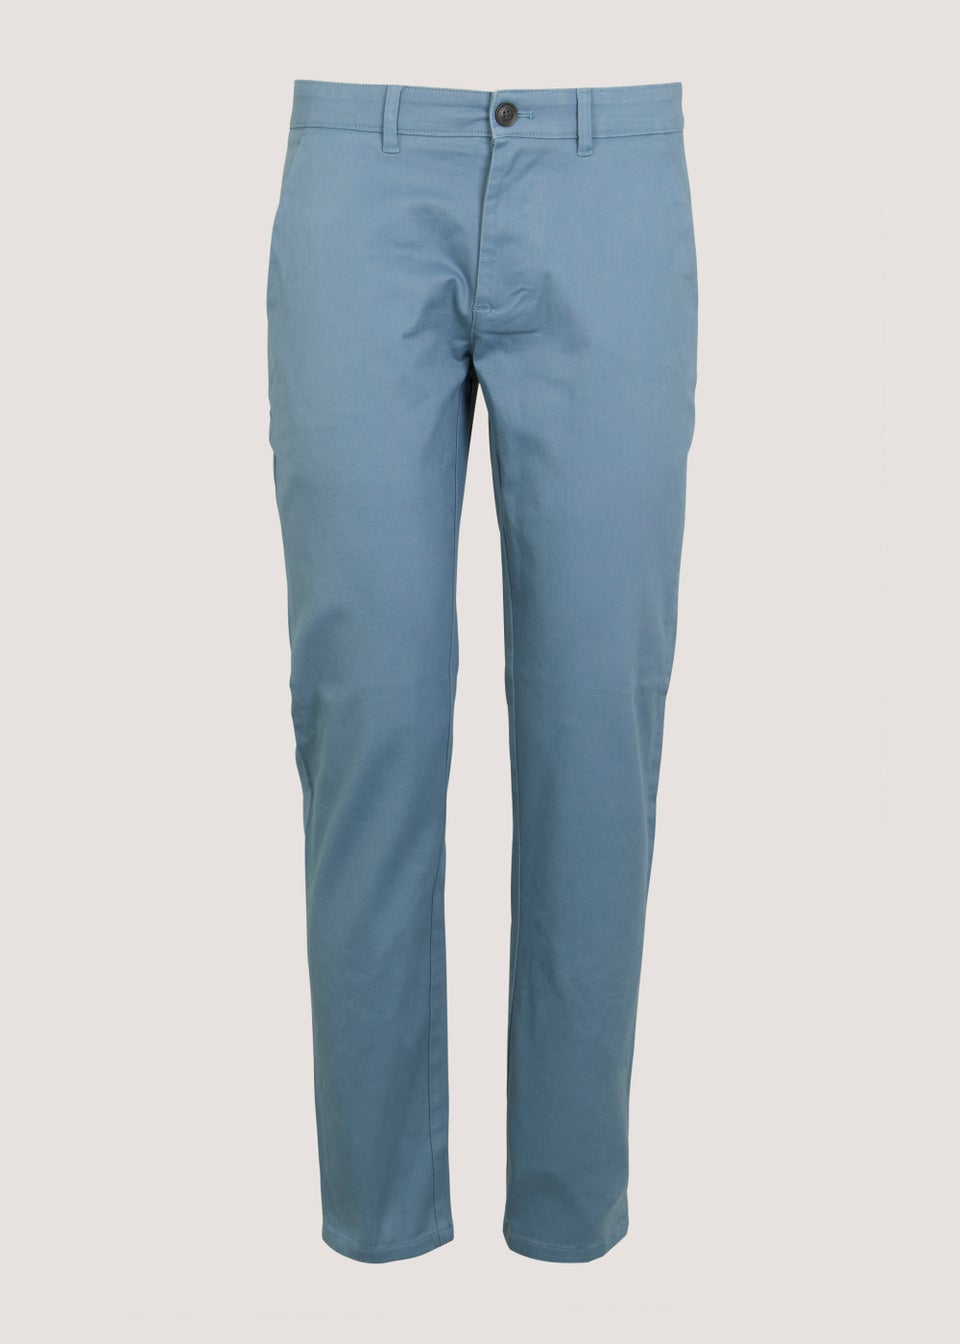 parade luge Brød Teal Straight Fit Stretch Chinos - Matalan